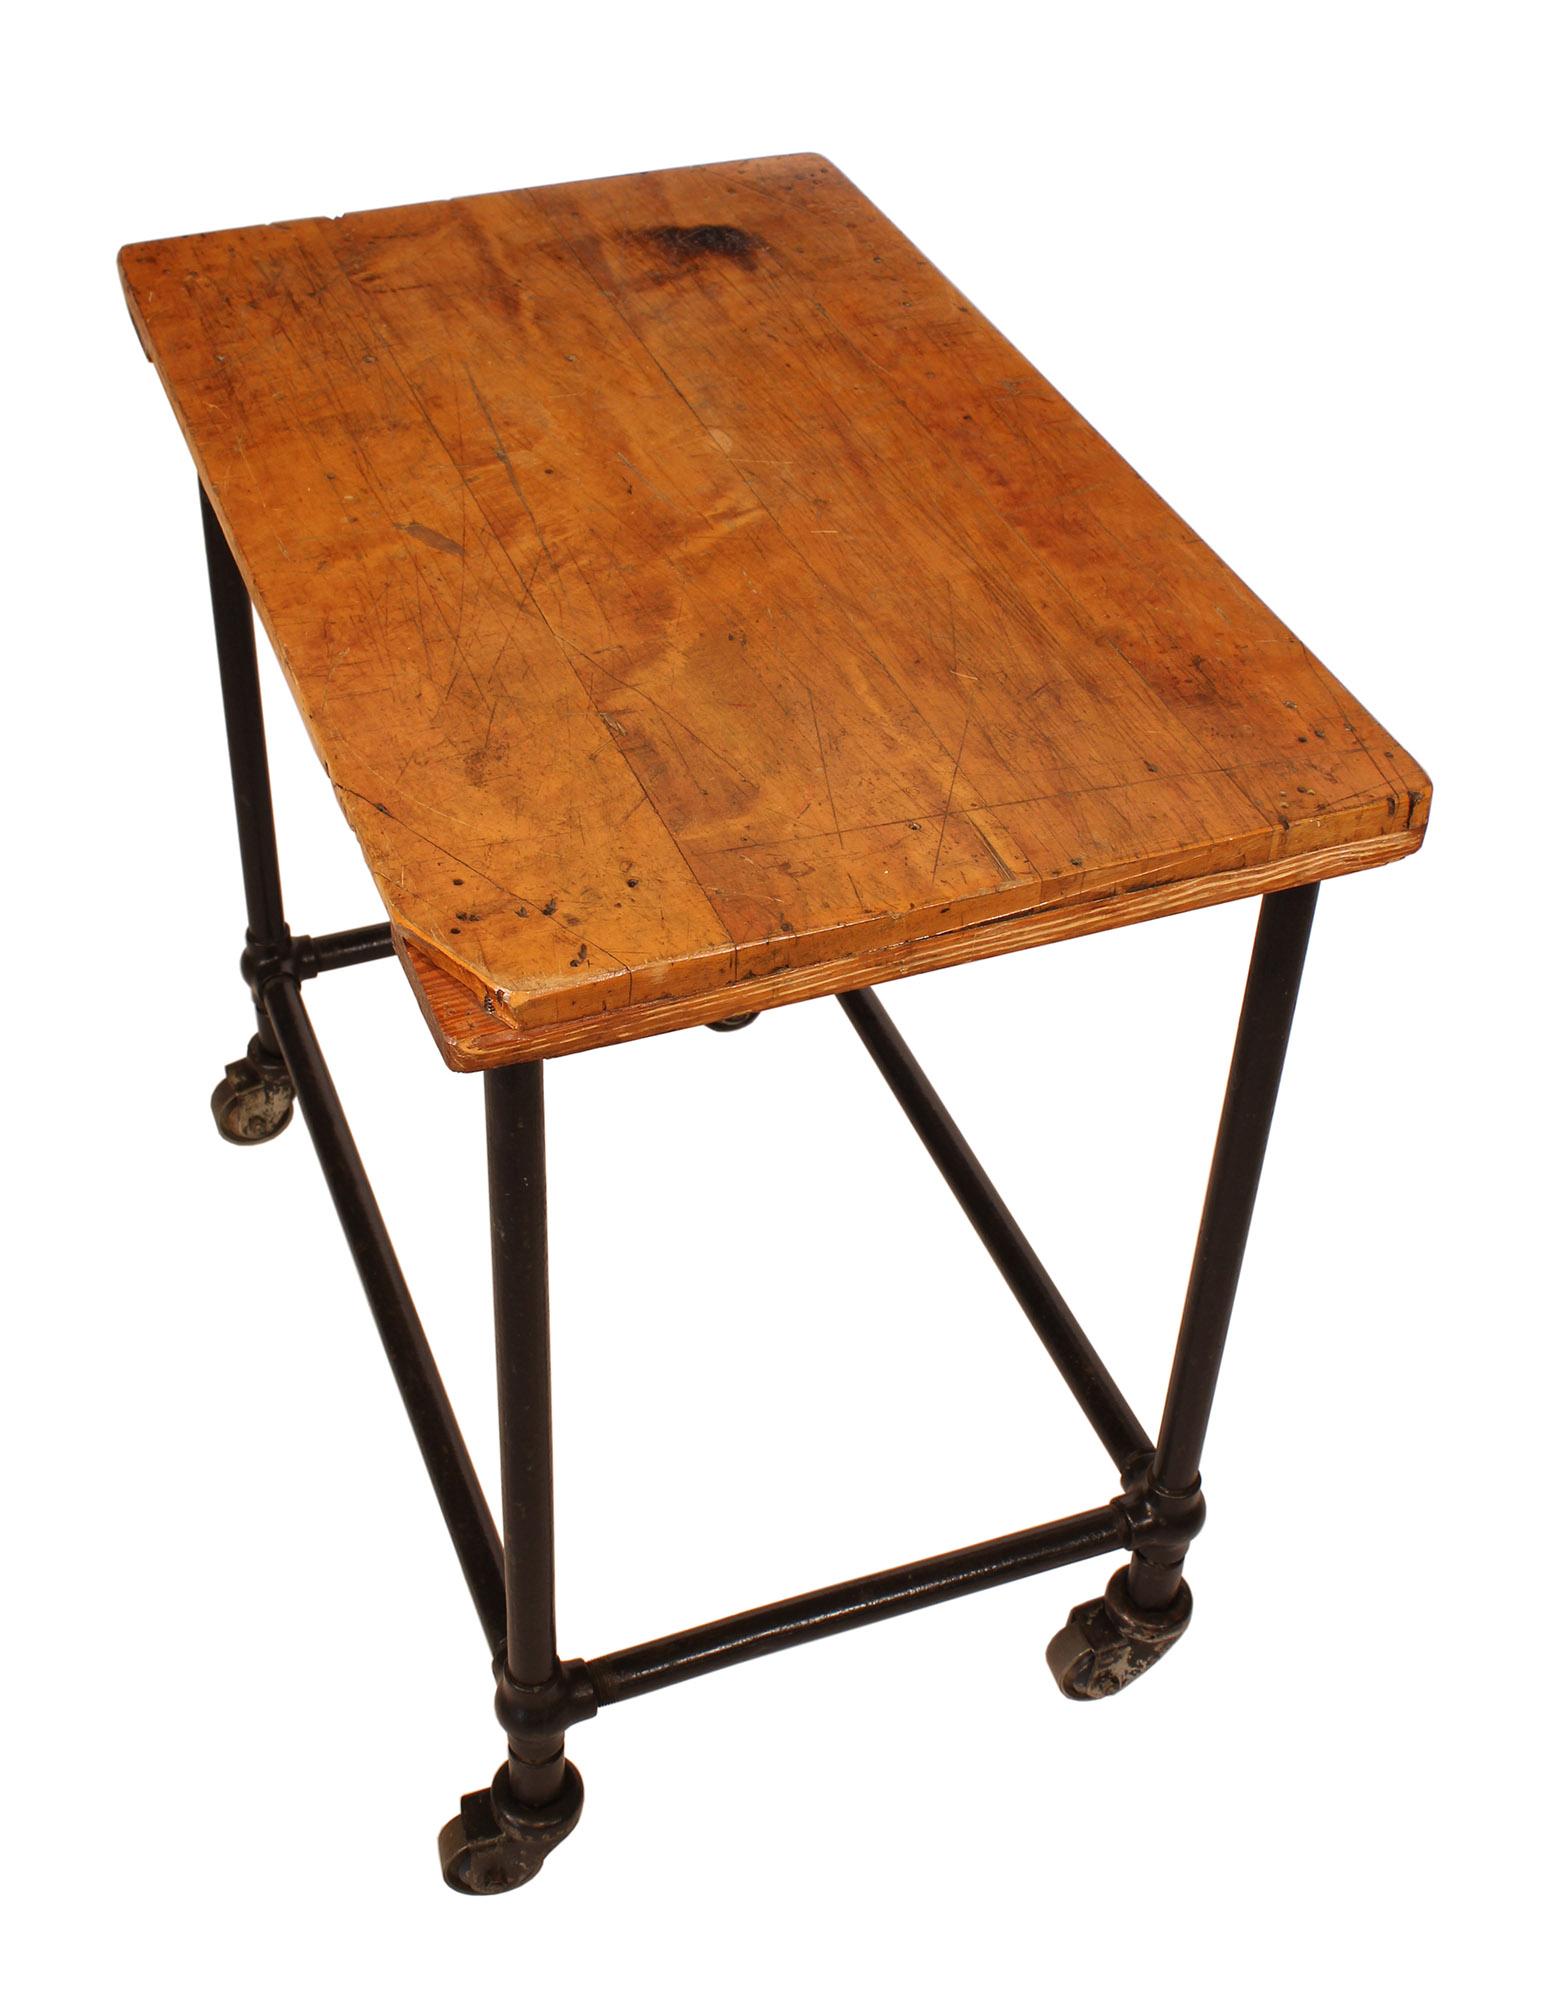 Authentic Vintage Industrial Rolling Printing Table or Cart 3